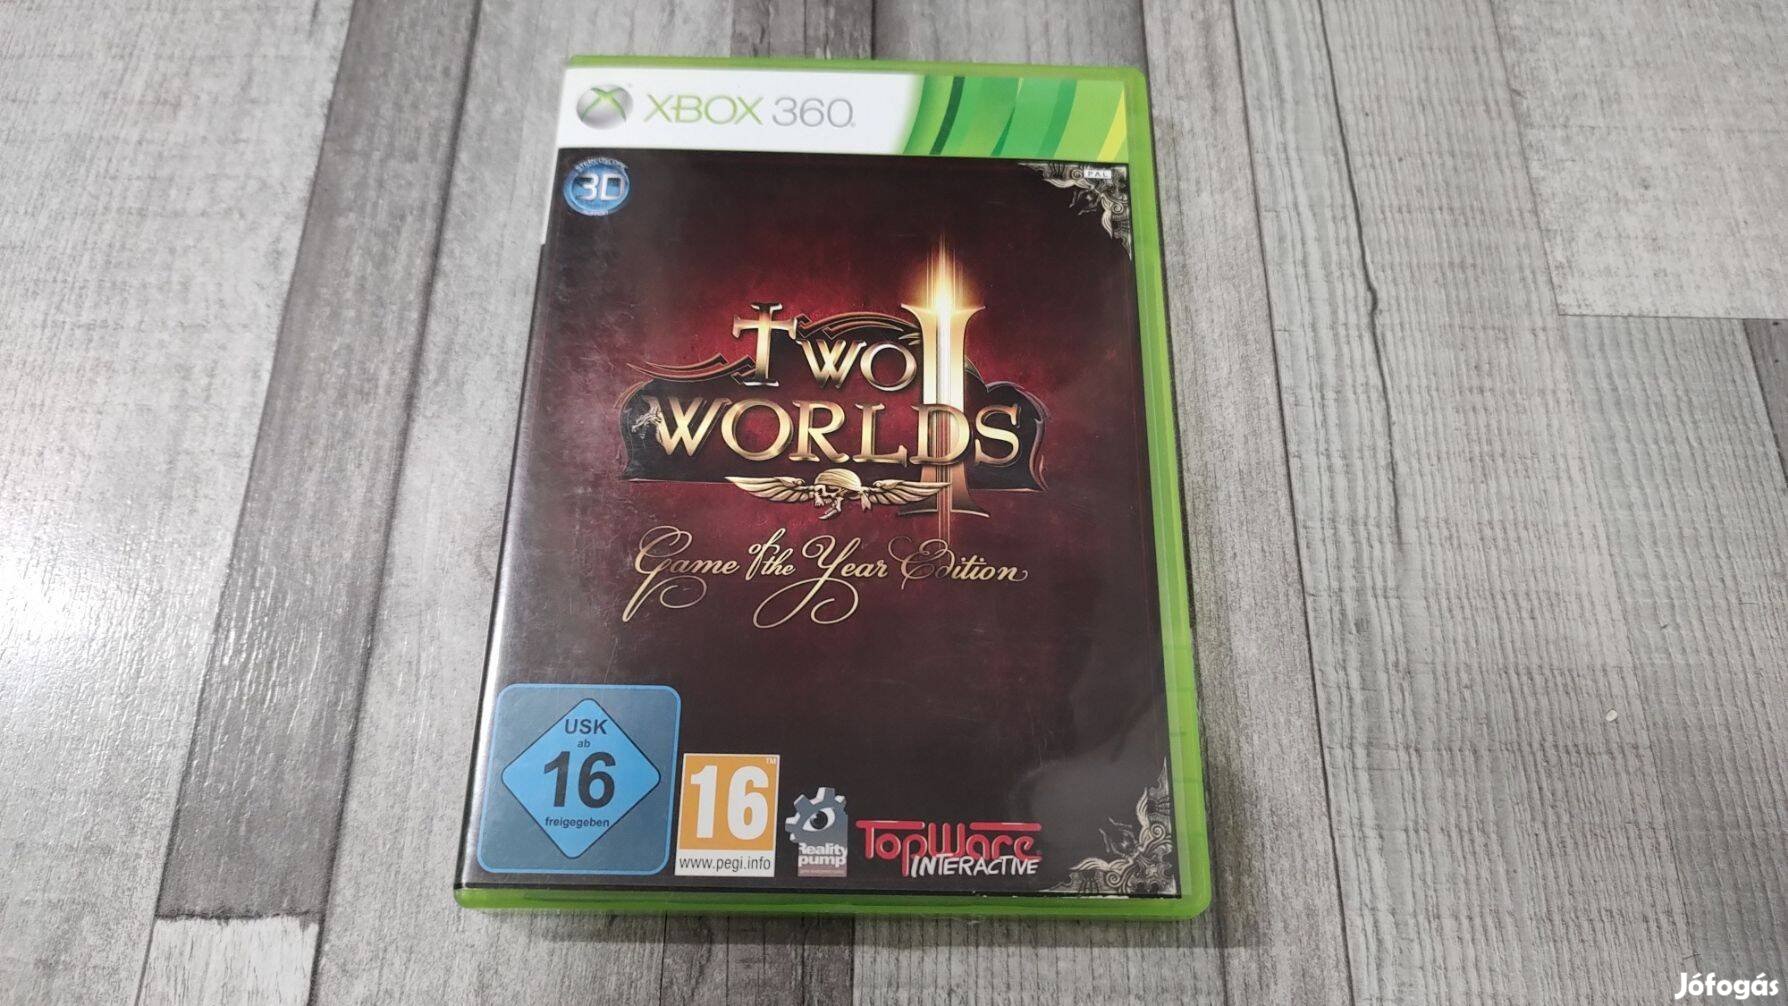 Top Xbox 360 : Two Worlds II Game Of The Year Edition